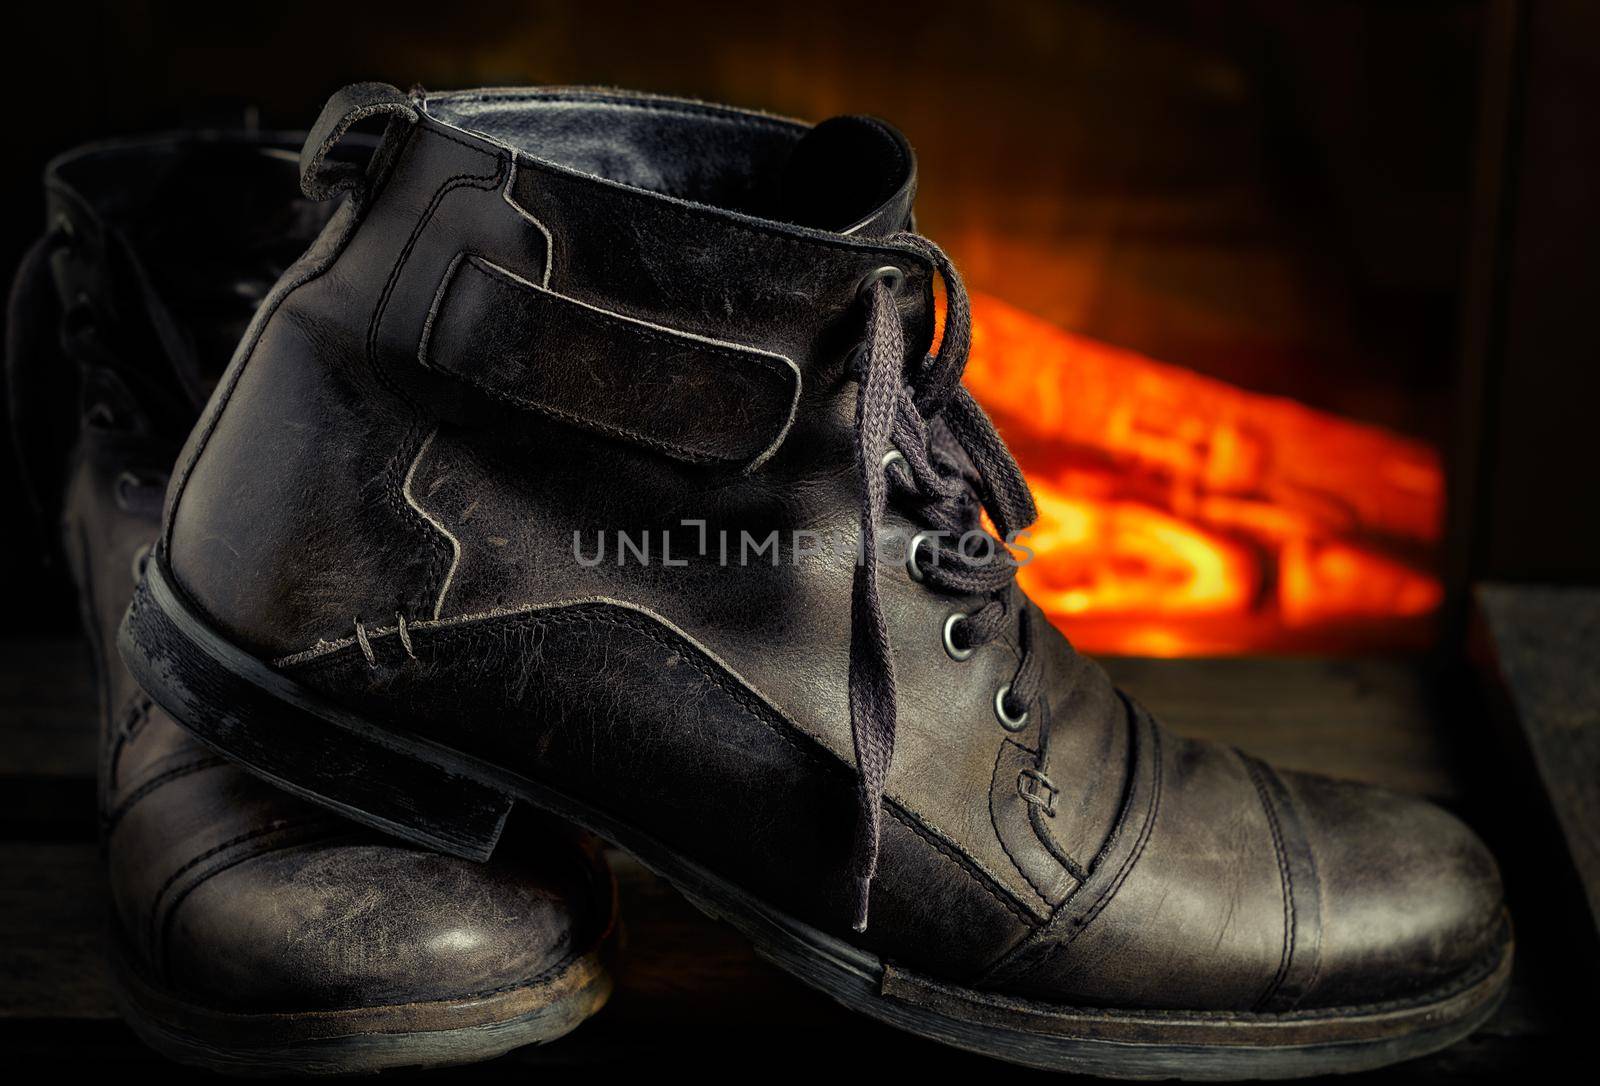 Casual gray leather shoes for men on wooden board with fireplace in the background. Dark mood style. Horizontal image.